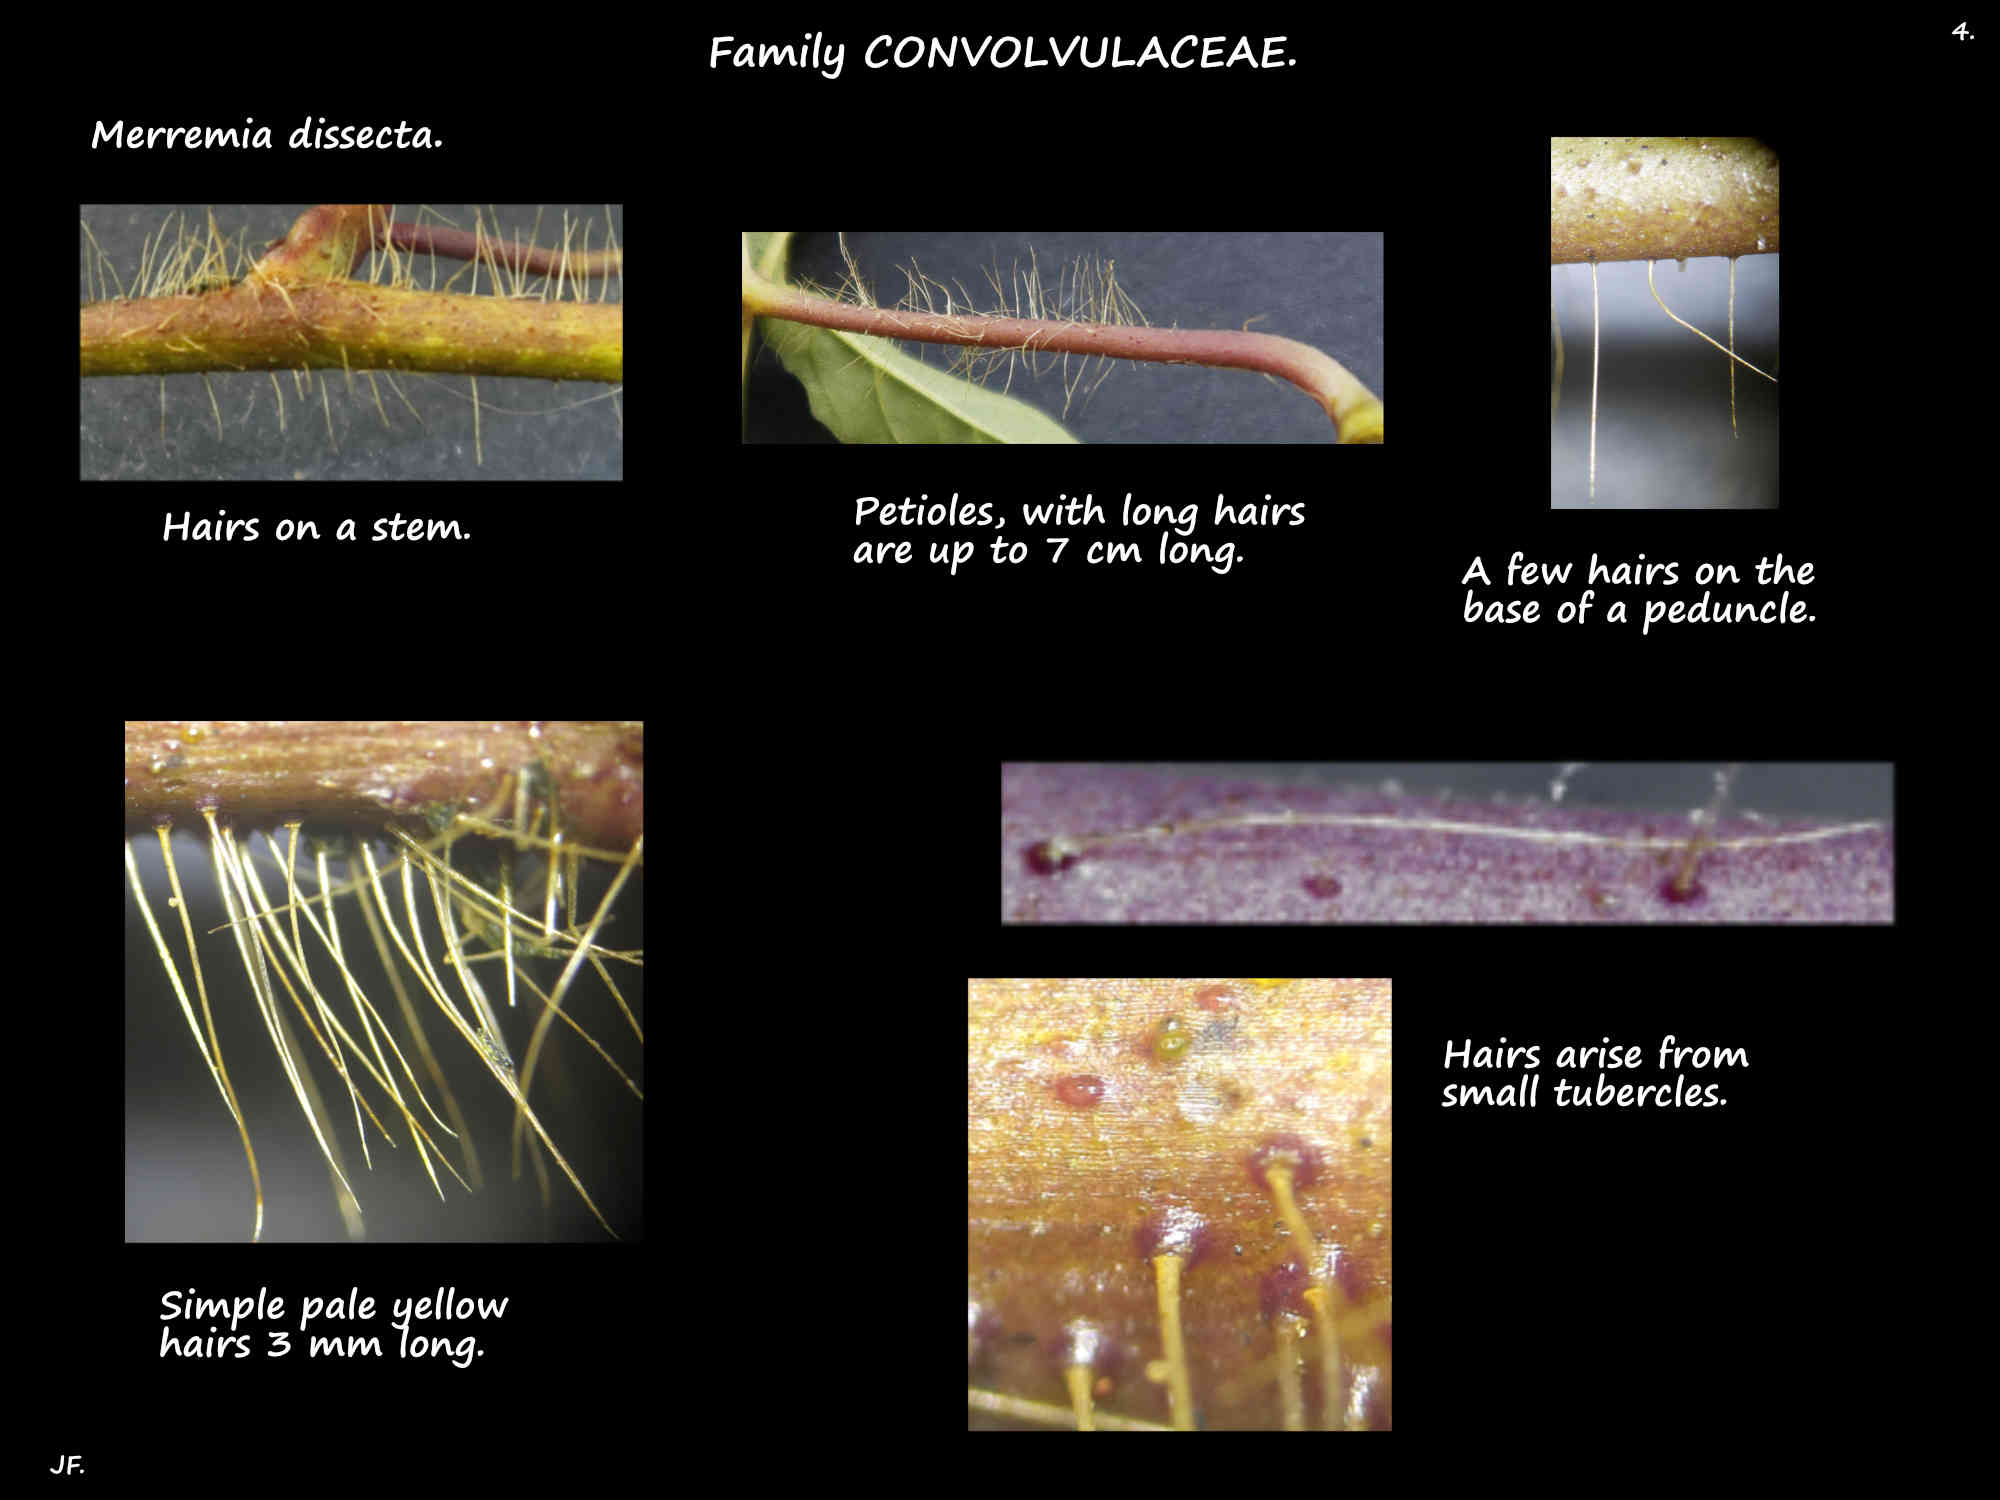 4 Simple hairs on Merremia dissecta plants